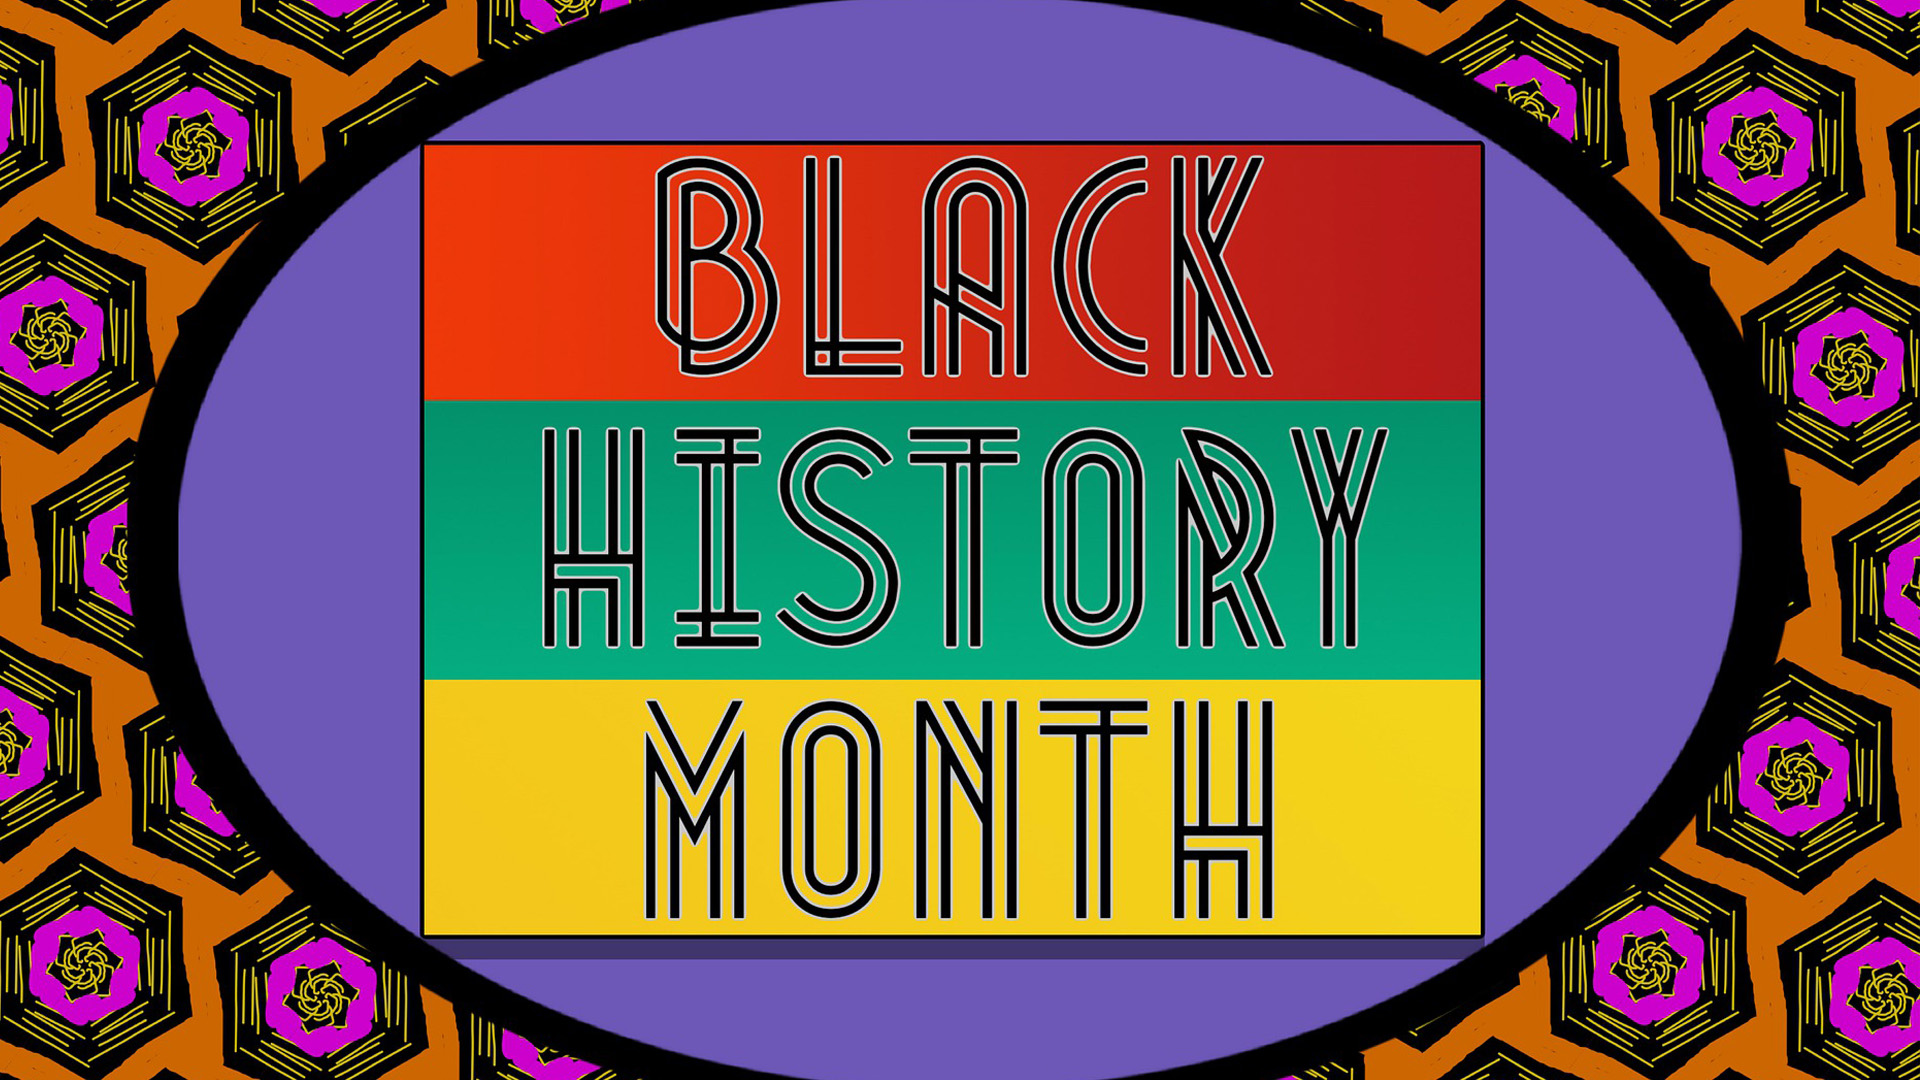 Orange, pink, black and yellow hexagon background pattern with a purple circle. within that circle there is a square that reads "Black History Month" stacked in red, yellow, and green blocks.